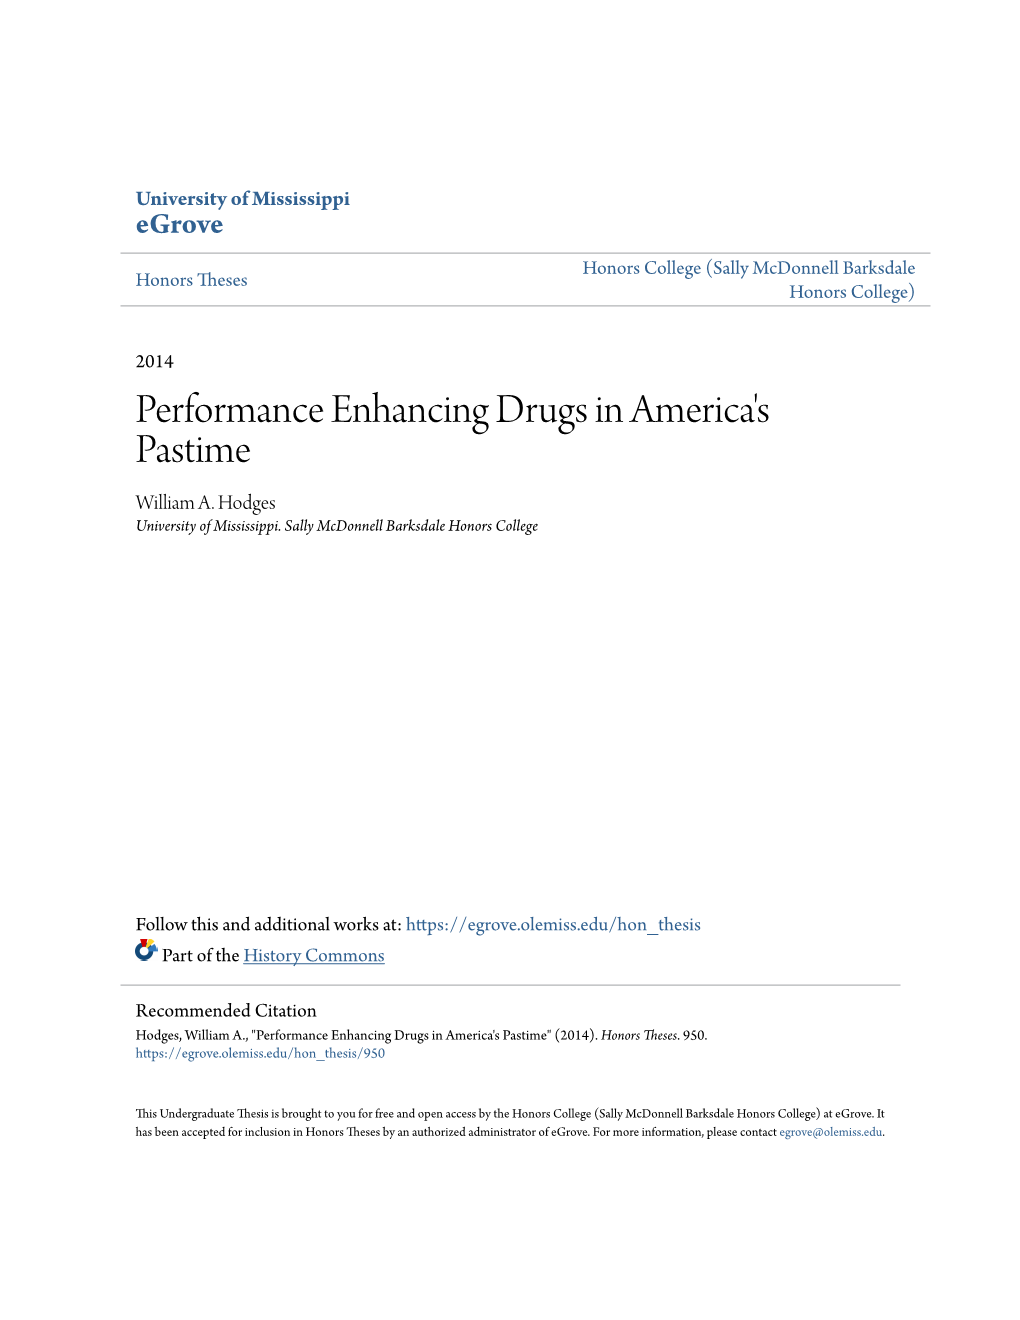 Performance Enhancing Drugs in America's Pastime William A